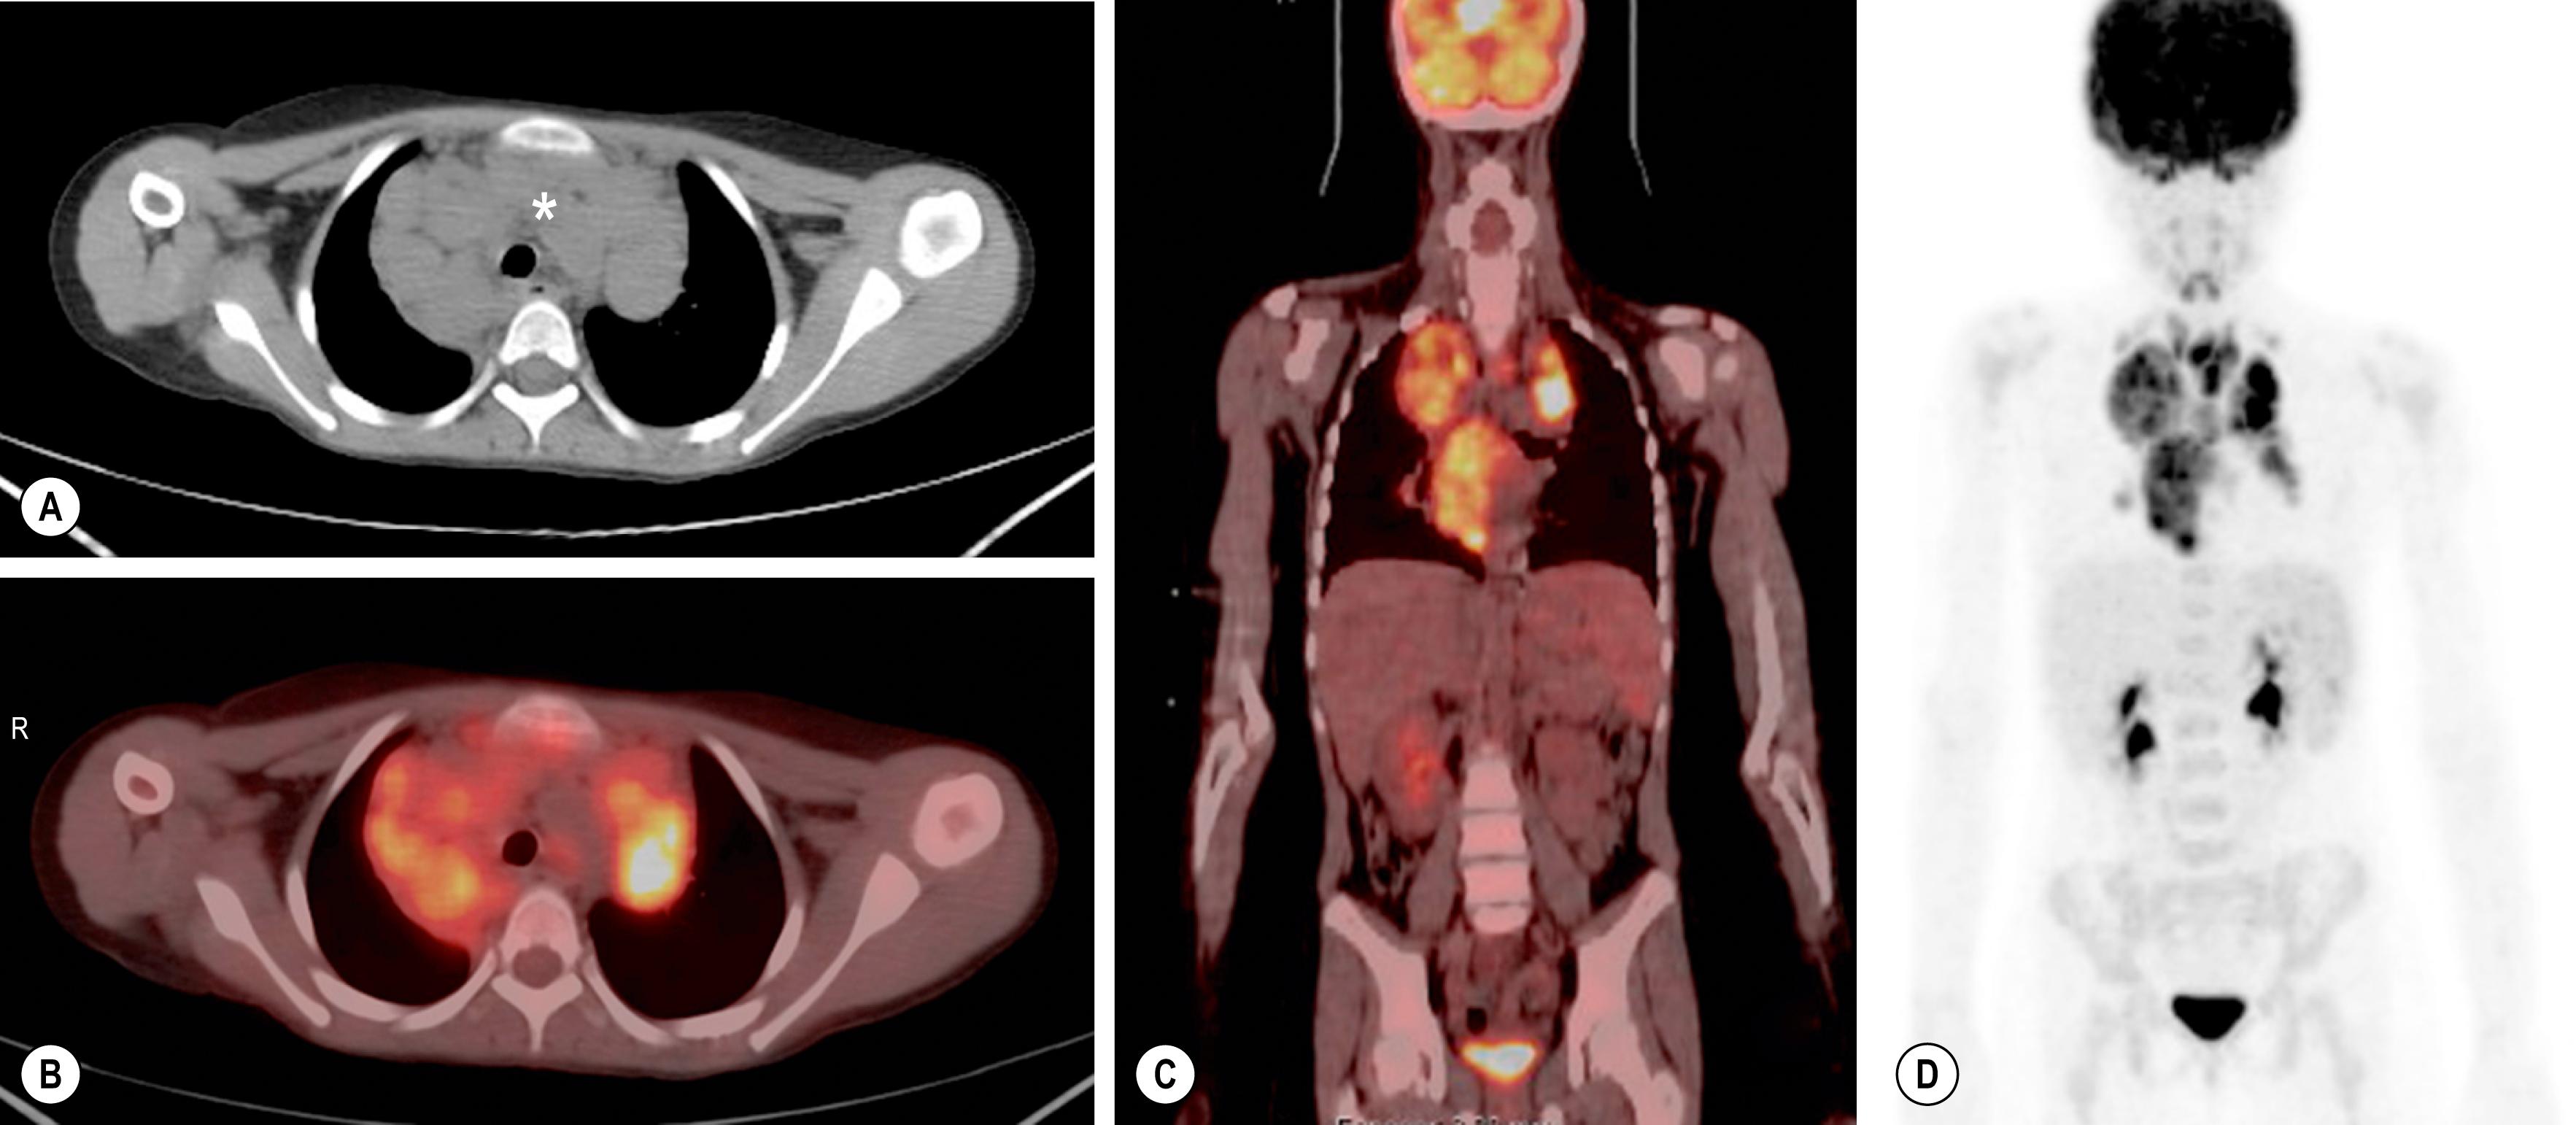 Fig. 25.5, Axial CT (A) and PET-CT (B) of a 10-year-old girl with mediastinal nodular-sclerosis Hodgkin lymphoma (asterisk). Coronal PET-CT (C) and PET (D) scans do not show pathologic activity in the cervical nodes. The diagnosis was made by biopsy via thoracoscopy.